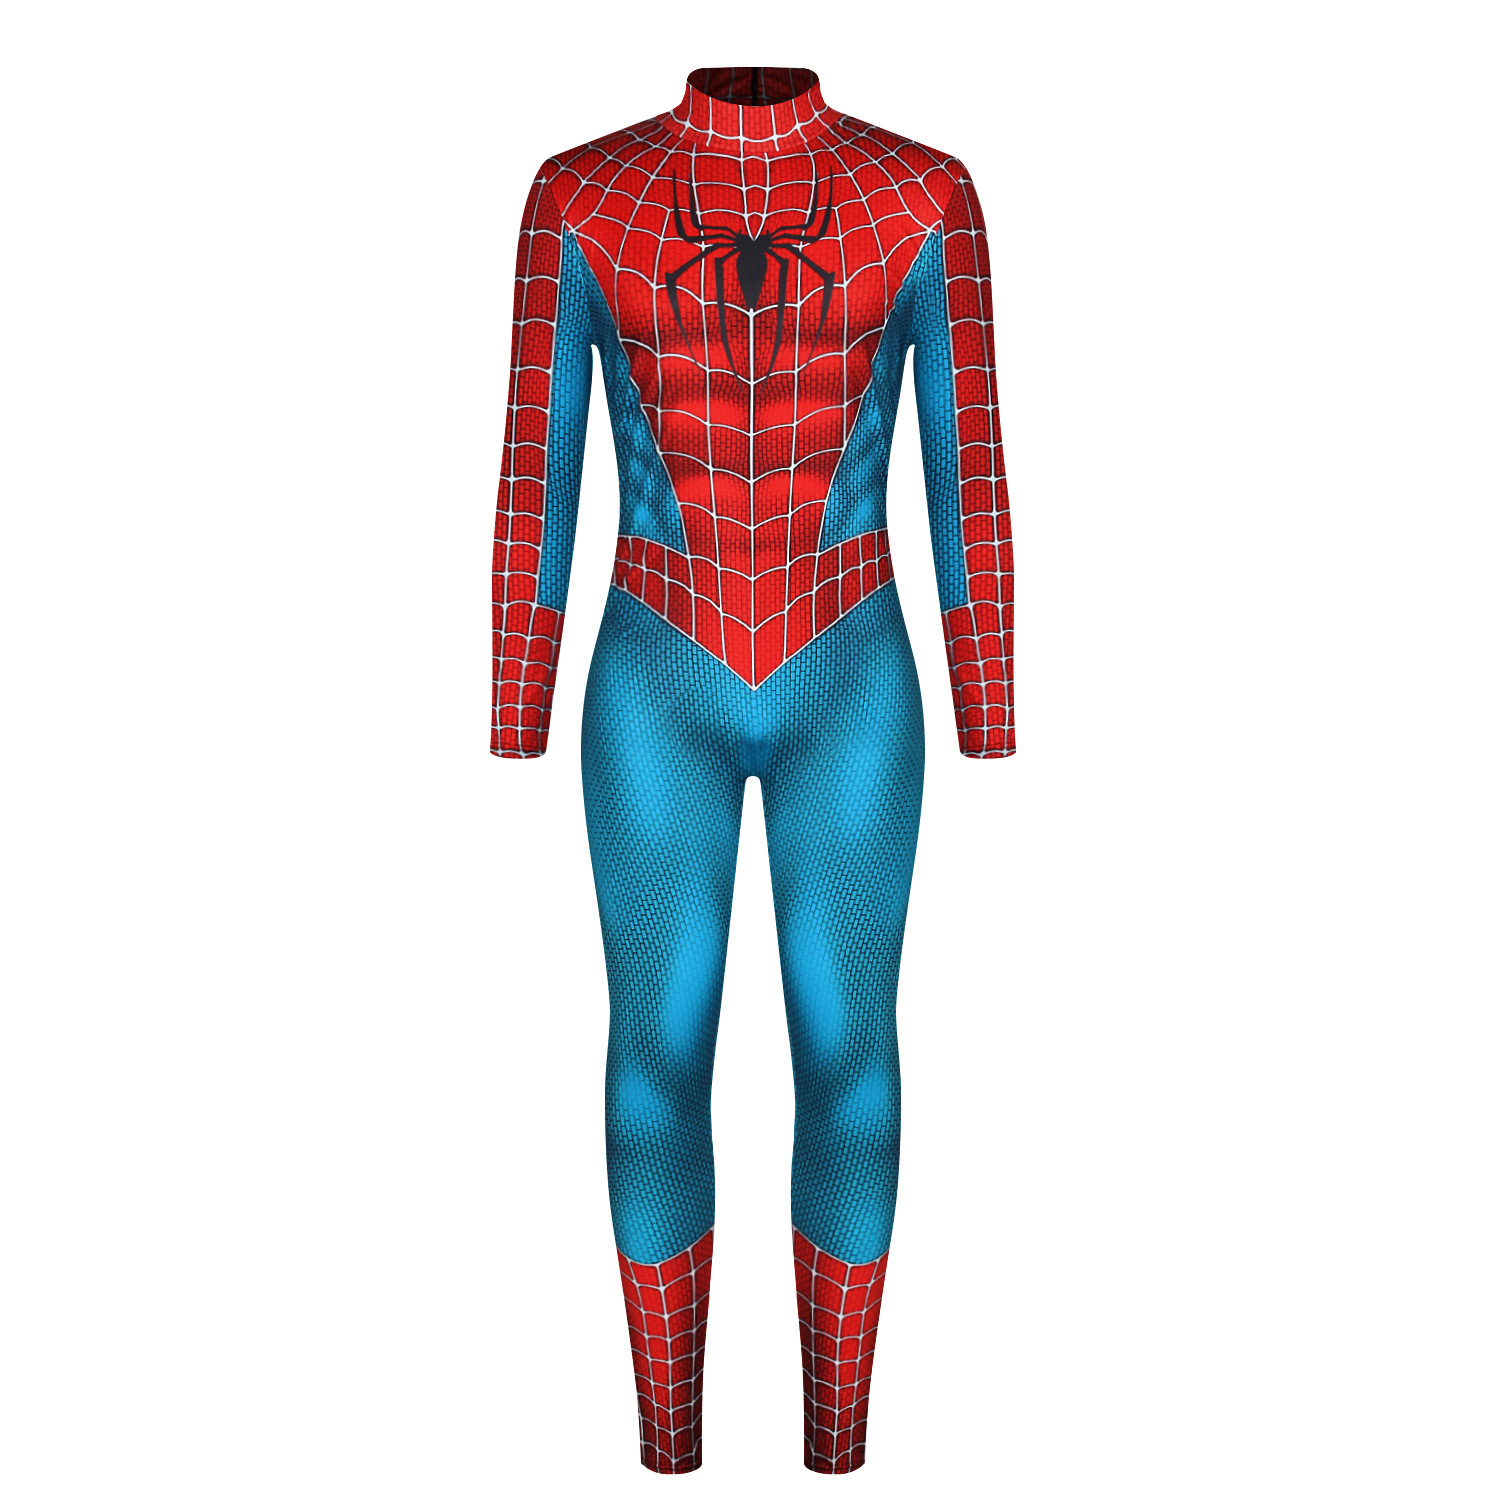 Mens Cosplays Spider Jumpsuit Adult Tight Siamese Adjust Cosplay Costume Size L